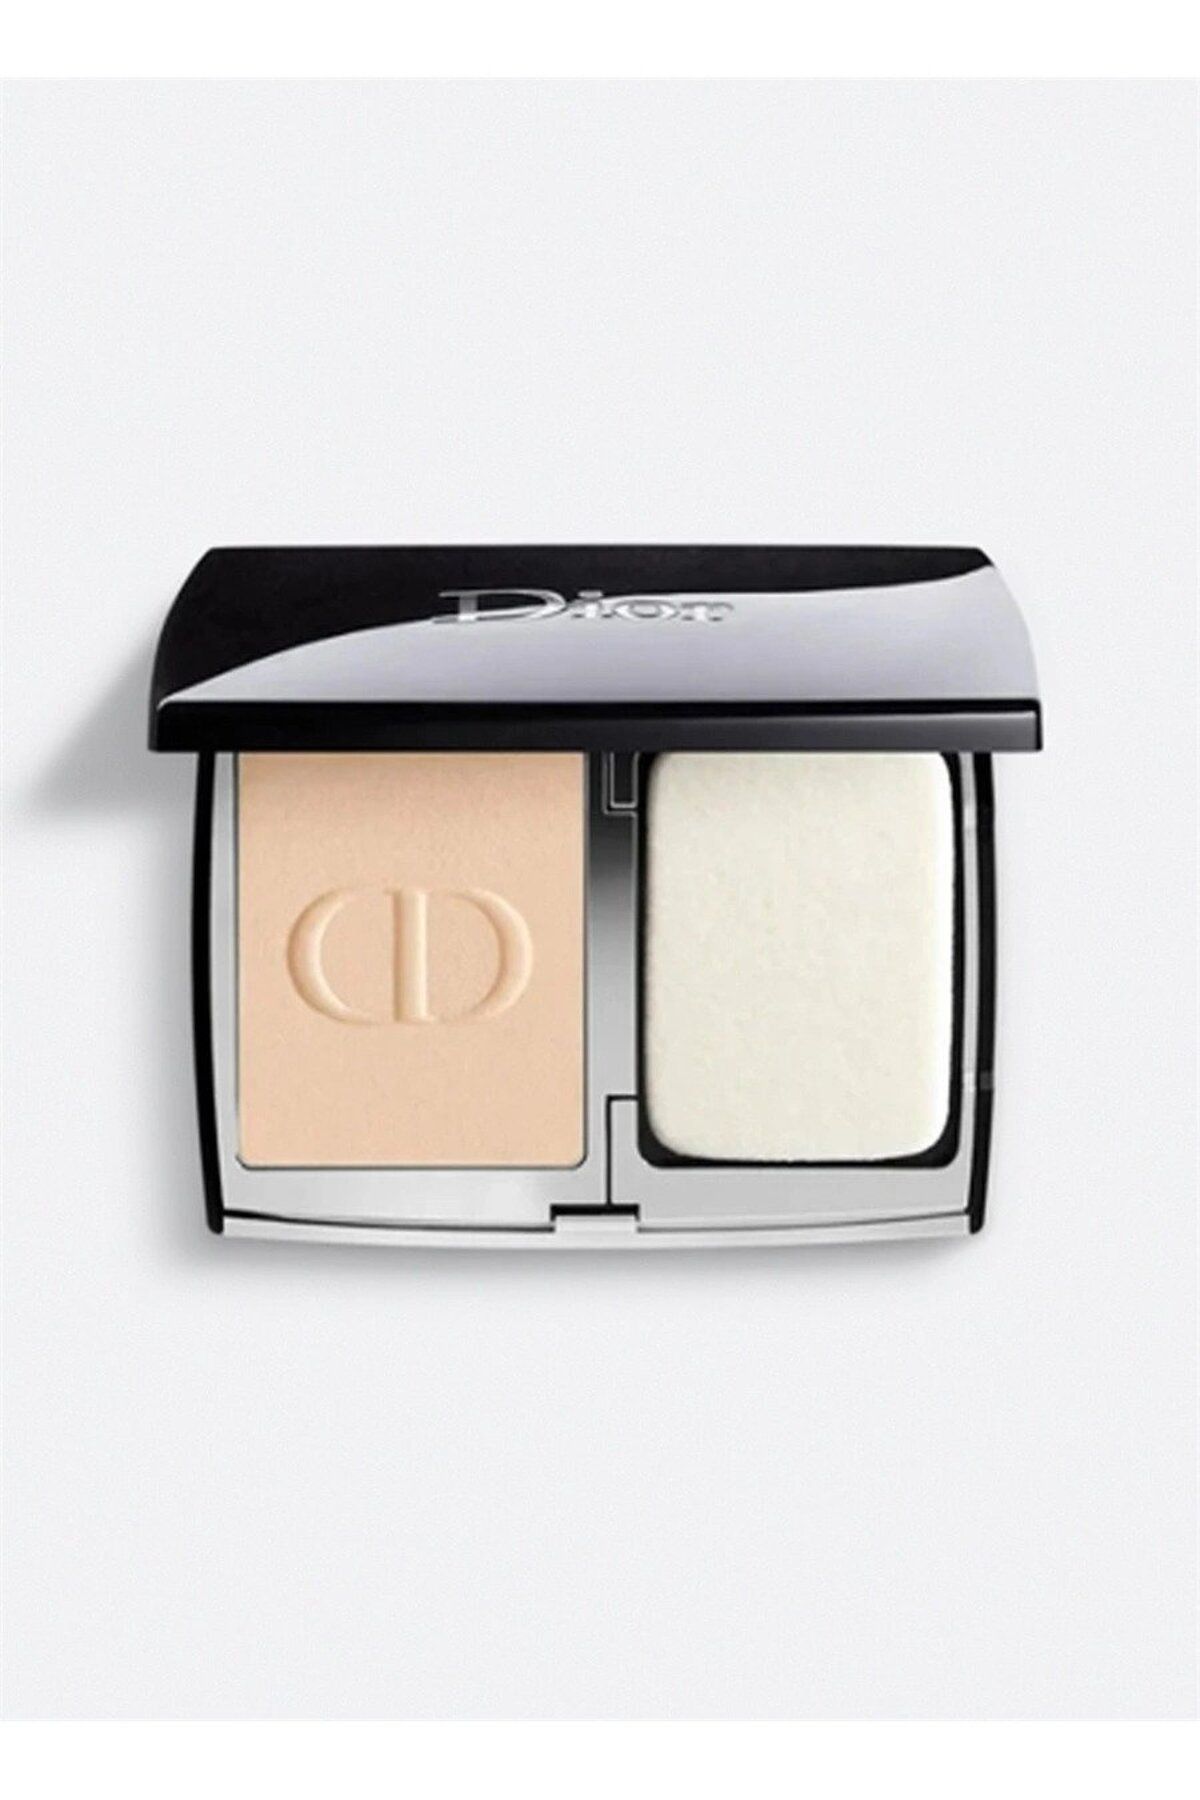 Dior - Pudra - Forever Natural Velvet Compact Foundation 2N